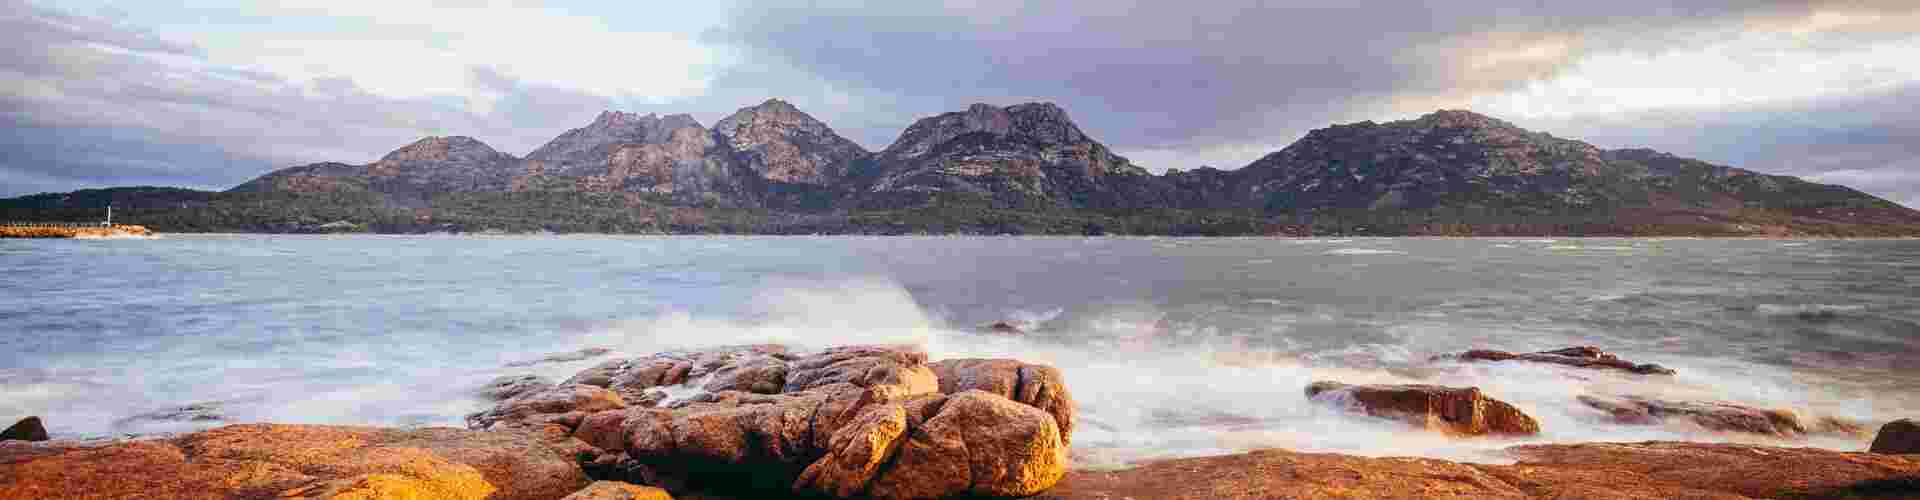 A scenic view of Freycinet National Park at sunset